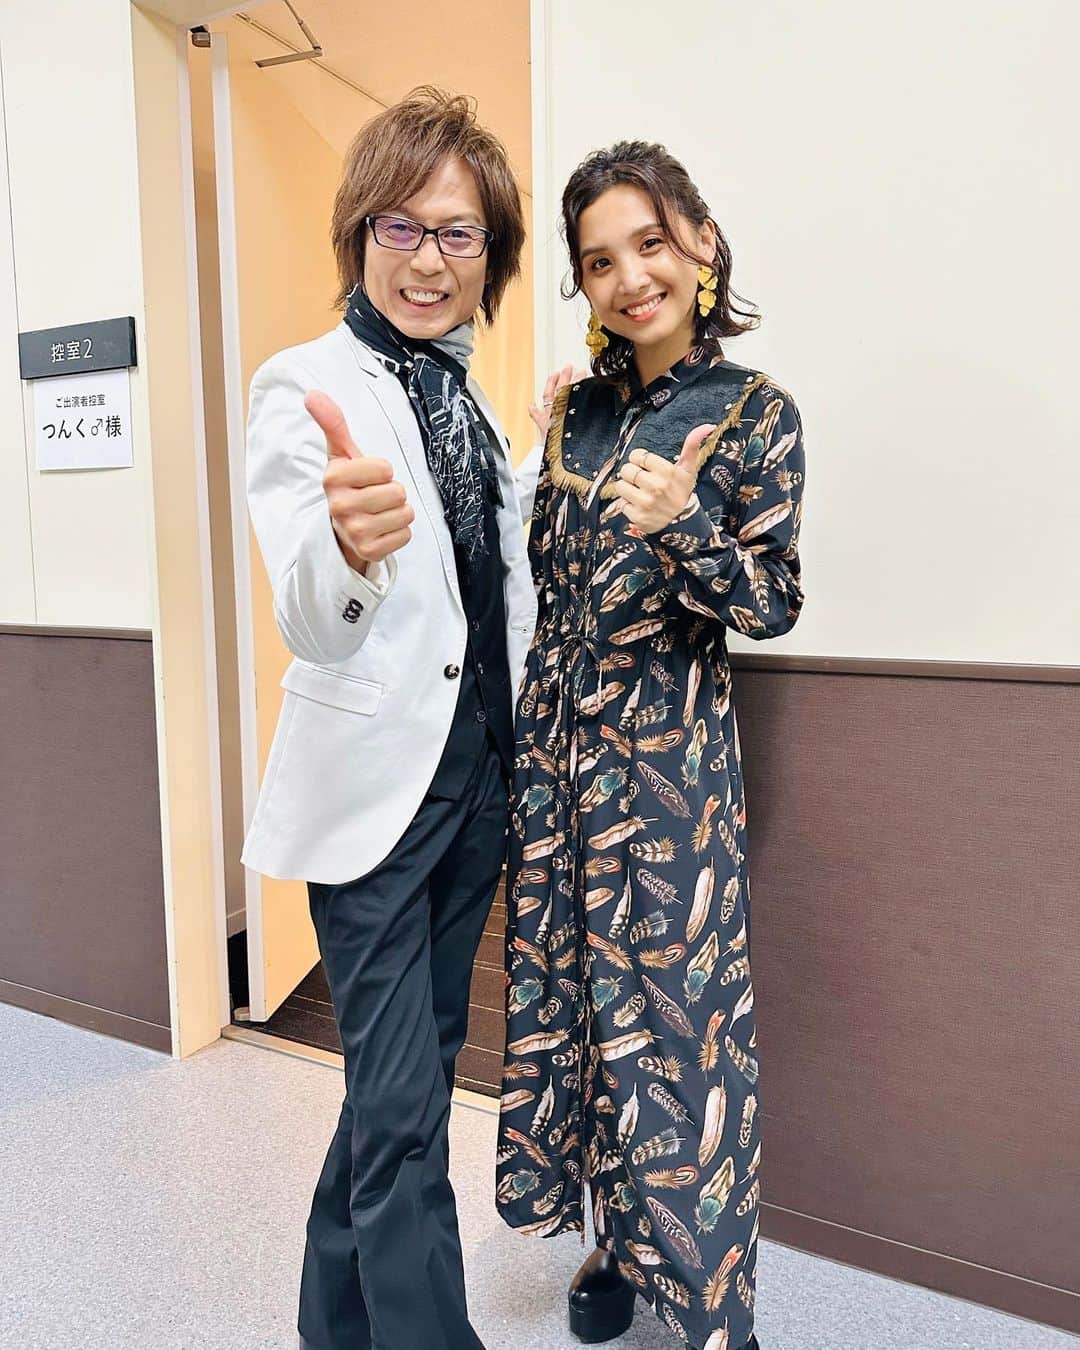 Beverlyのインスタグラム：「「LIVES TOKYO 2023」に今年も出演させていただきました！  So happy to see you again, @tsunku_boy さん！Thank you for letting me sing your beautiful song 「Happy Now」😌  I was able to perform with these amazing people! Violinist, Takaaki Shirai and back up vocals, Wakana and Ryuga Camui!  Got to take a picture with the MC, Shoichiro Minami too.  This has been another inspiring day. Thanks to LIVES TOKYO and their warm and kind staff. 😌  #白井崇陽 さん 🎻 #若渚 さん 🎤 #神威龍牙 さん 🎤  #南正一郎 さん」